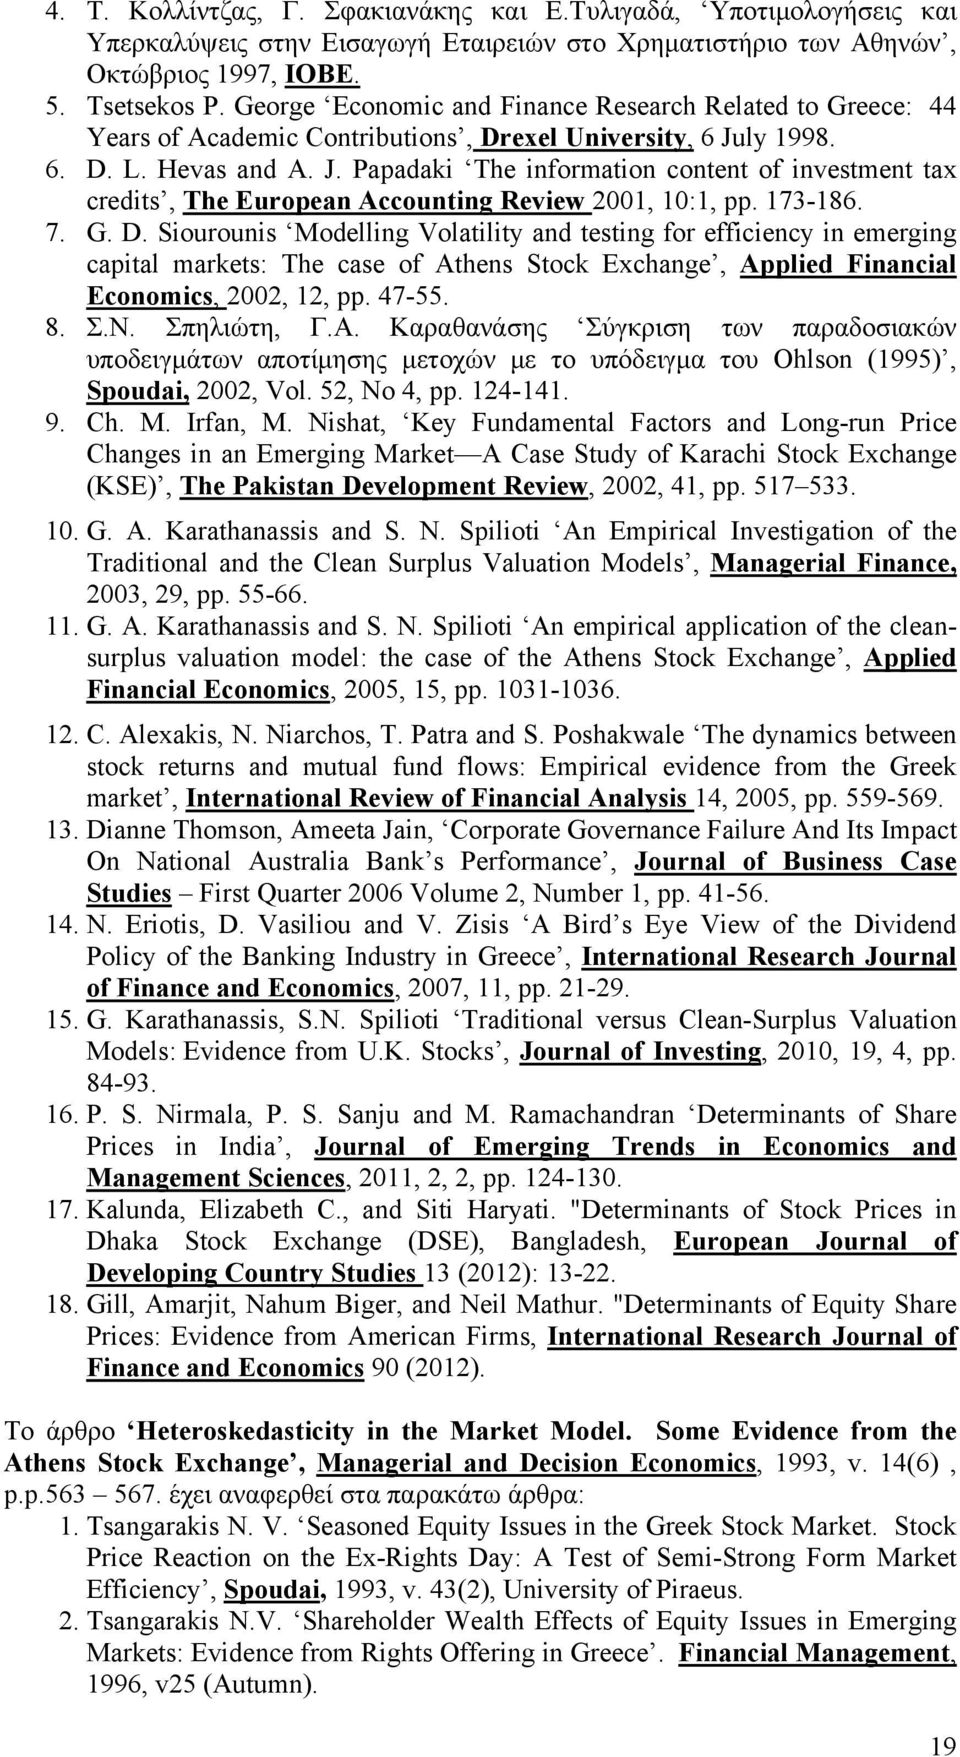 ly 1998. 6. D. L. Hevas and A. J. Papadaki The information content of investment tax credits, The European Accounting Review 2001, 10:1, pp. 173-186. 7. G. D. Siourounis Modelling Volatility and testing for efficiency in emerging capital markets: The case of Athens Stock Exchange, Applied Financial Economics, 2002, 12, pp.